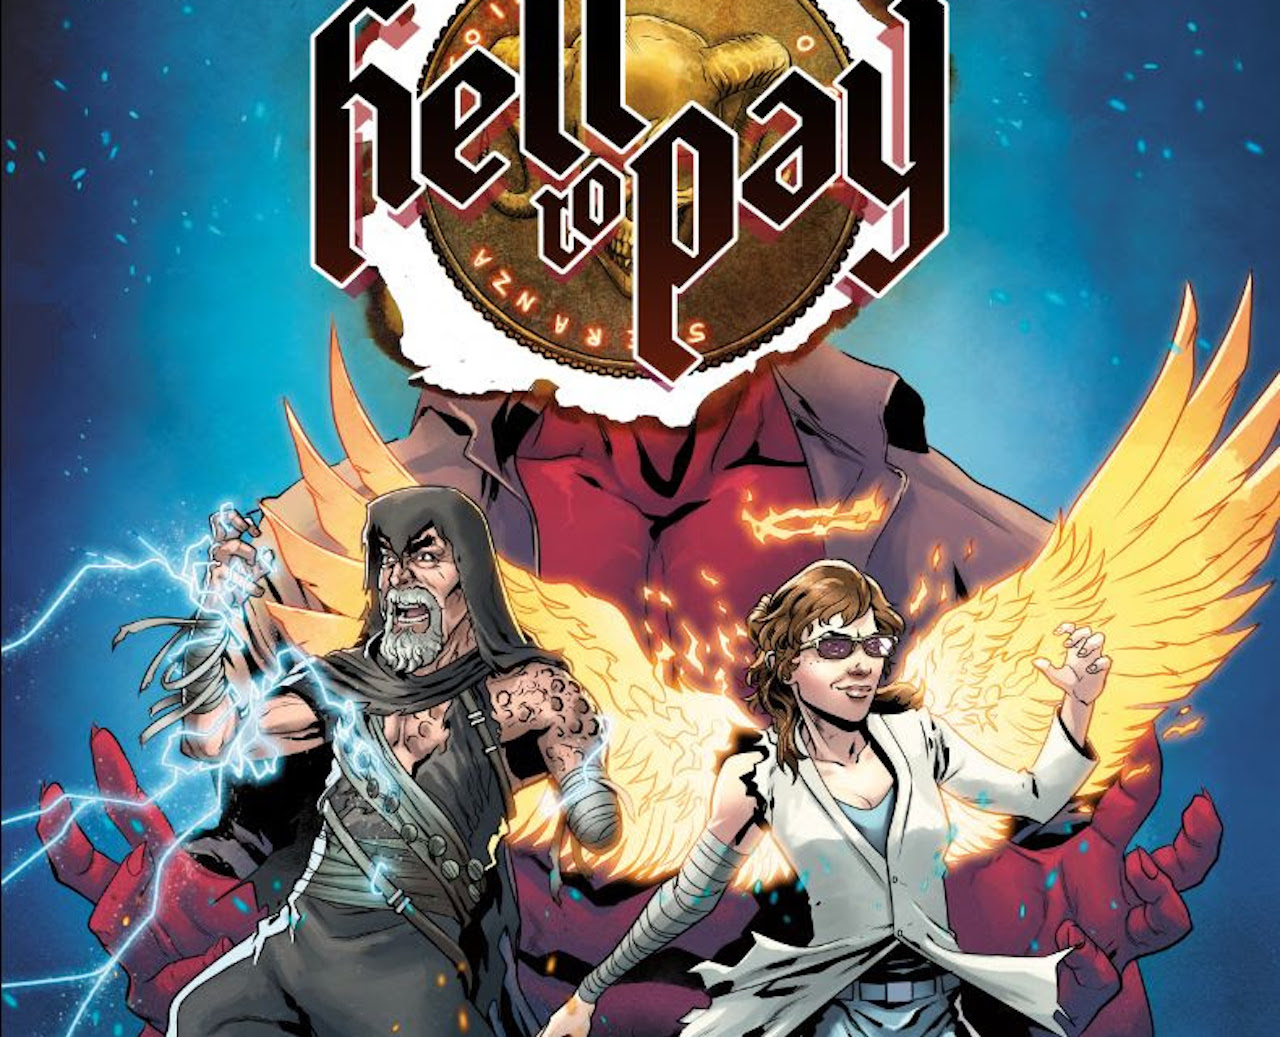 'Hell to Pay' #1 sells out and gets second printing